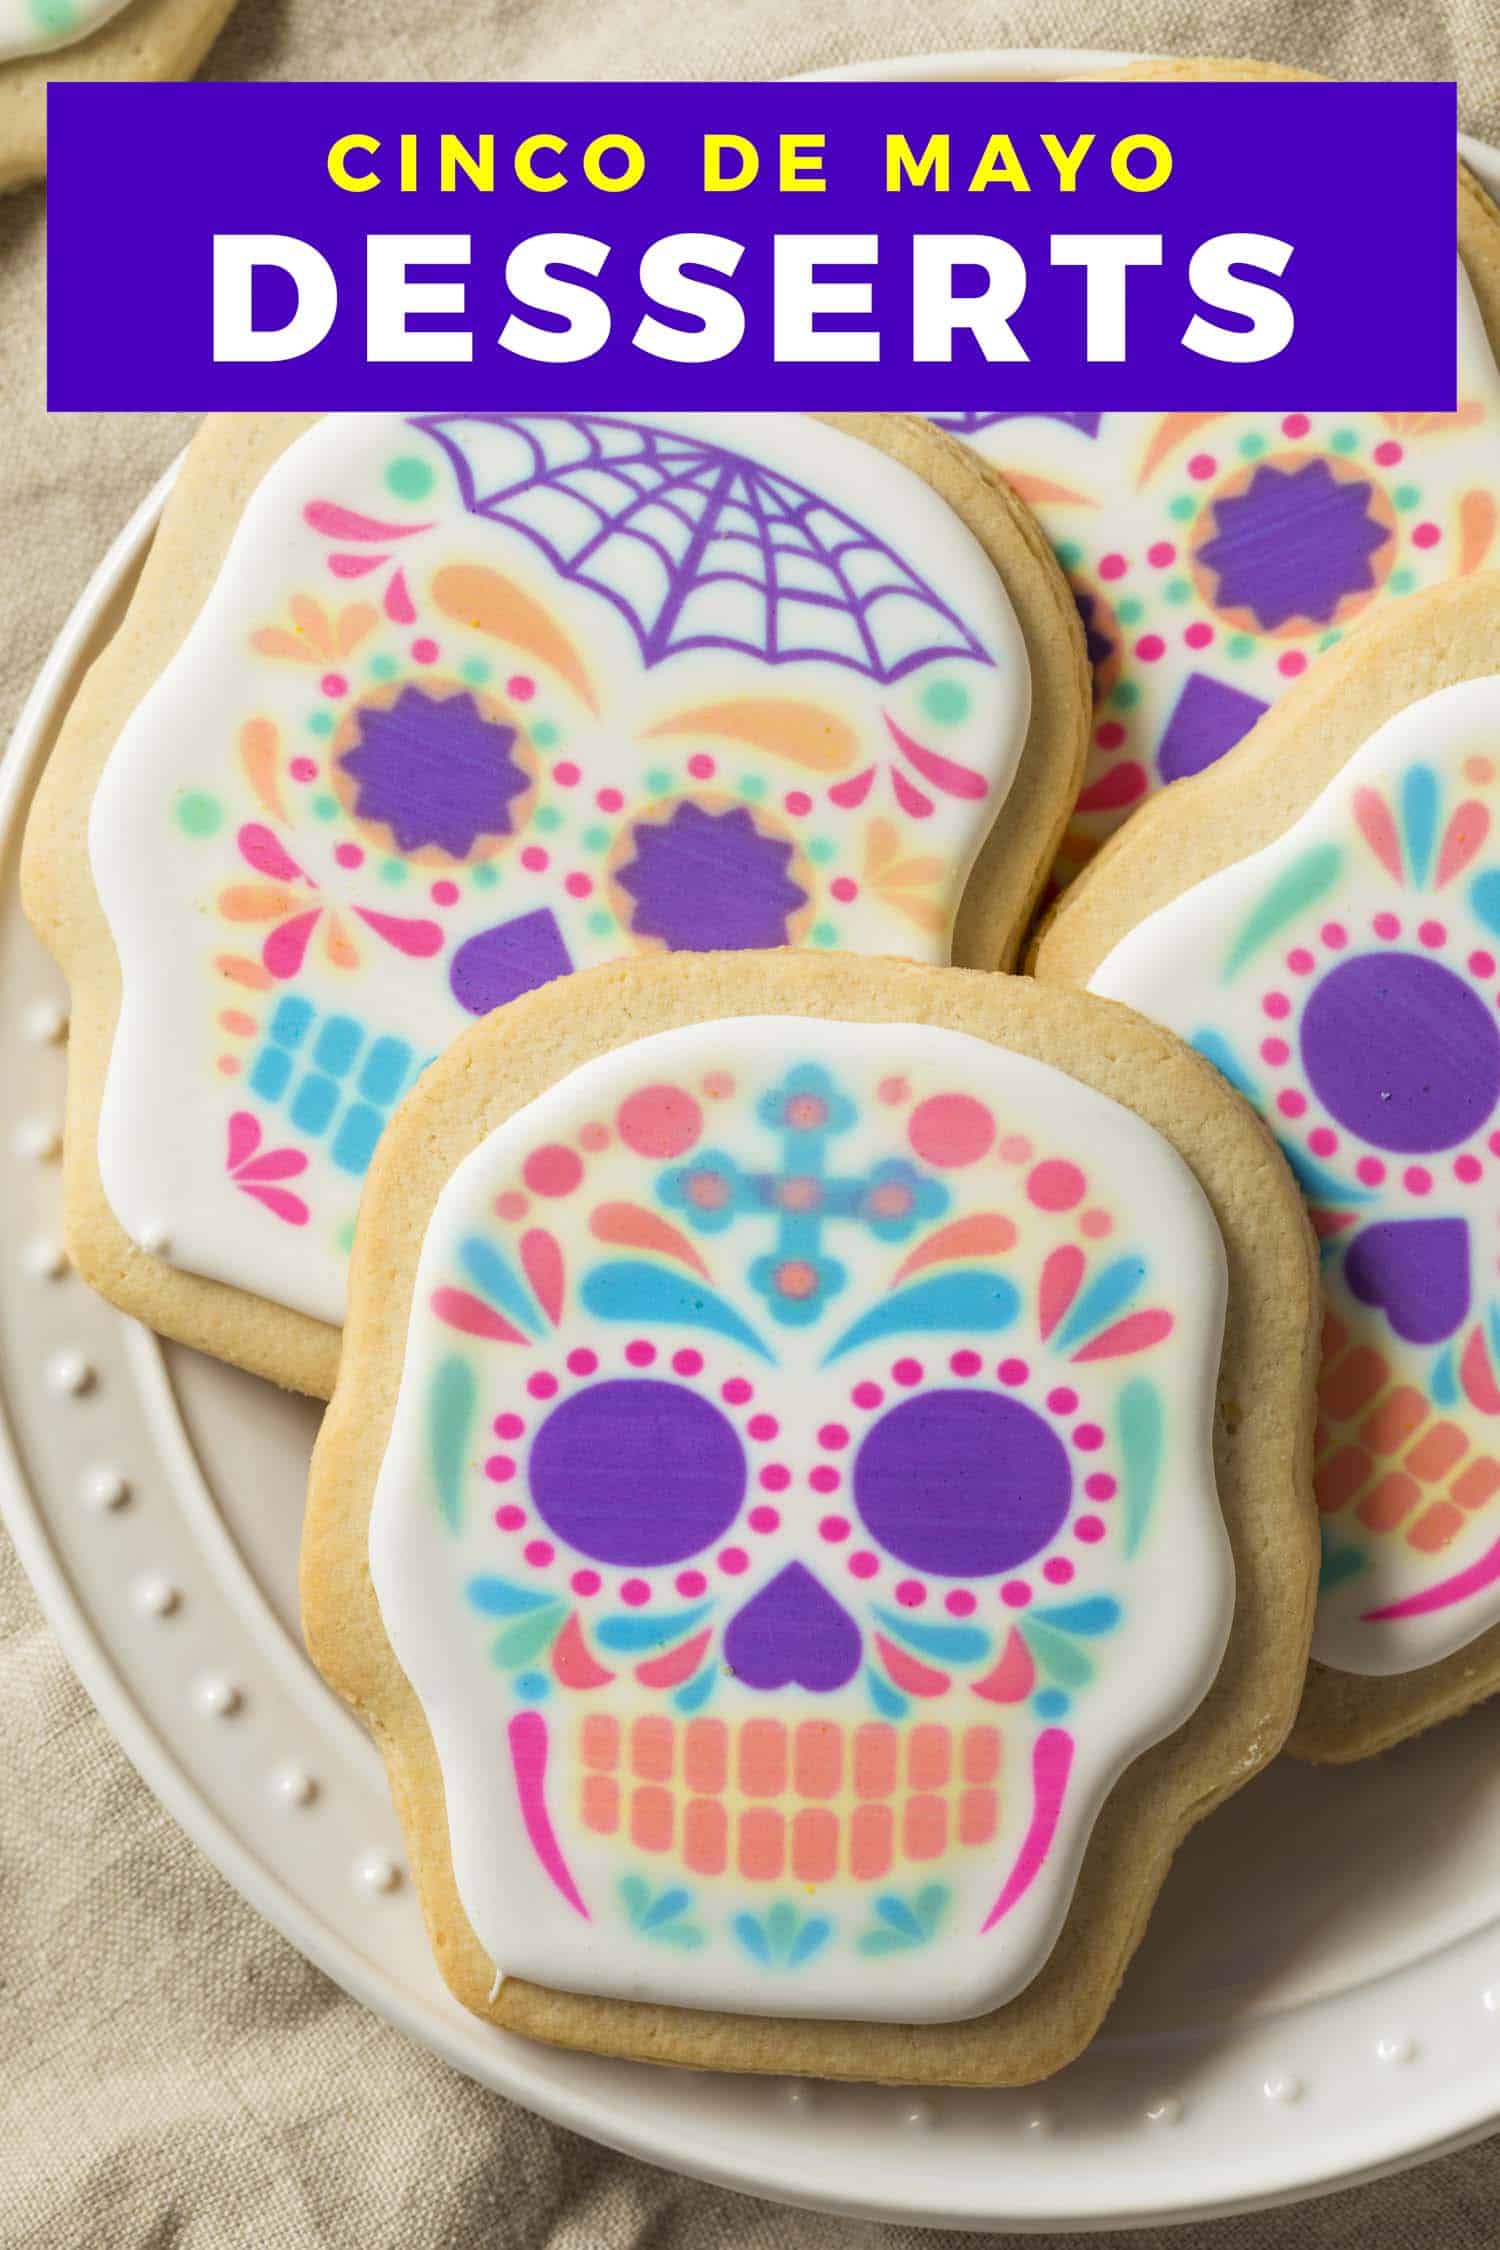 Sugar skulls, a popular Mexican cookie and Cinco de Mayo dessert, on a white plate on white tablecloth